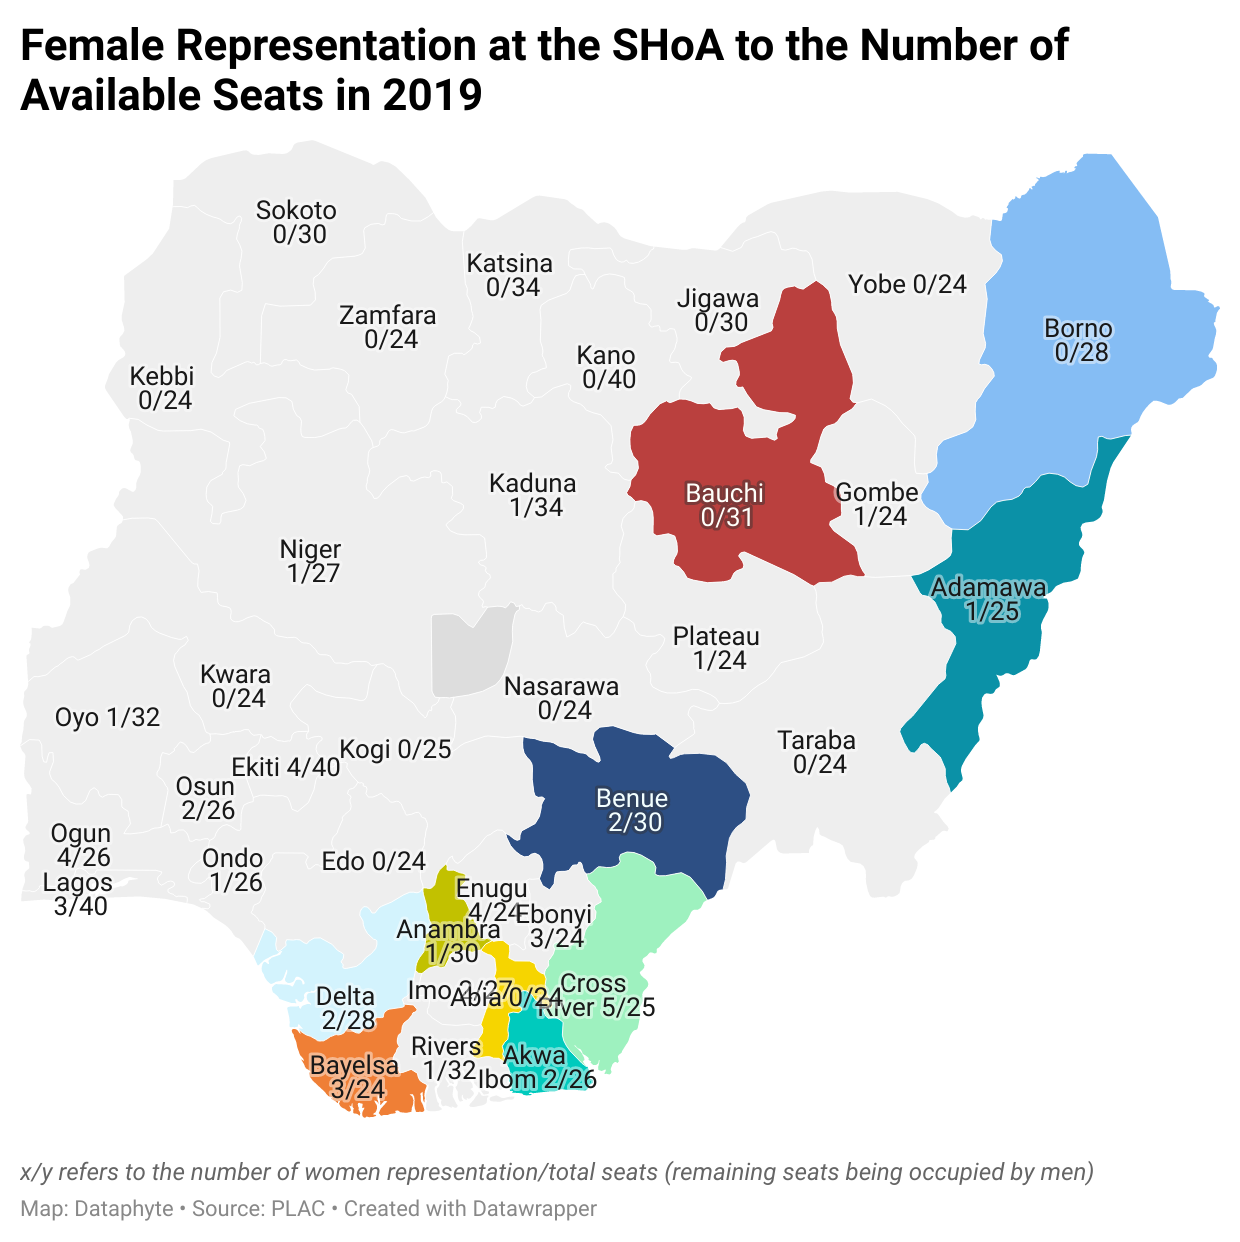 2023 Elections: With Only 4.5% State Representation in 2019, How can Female Representation Improve?